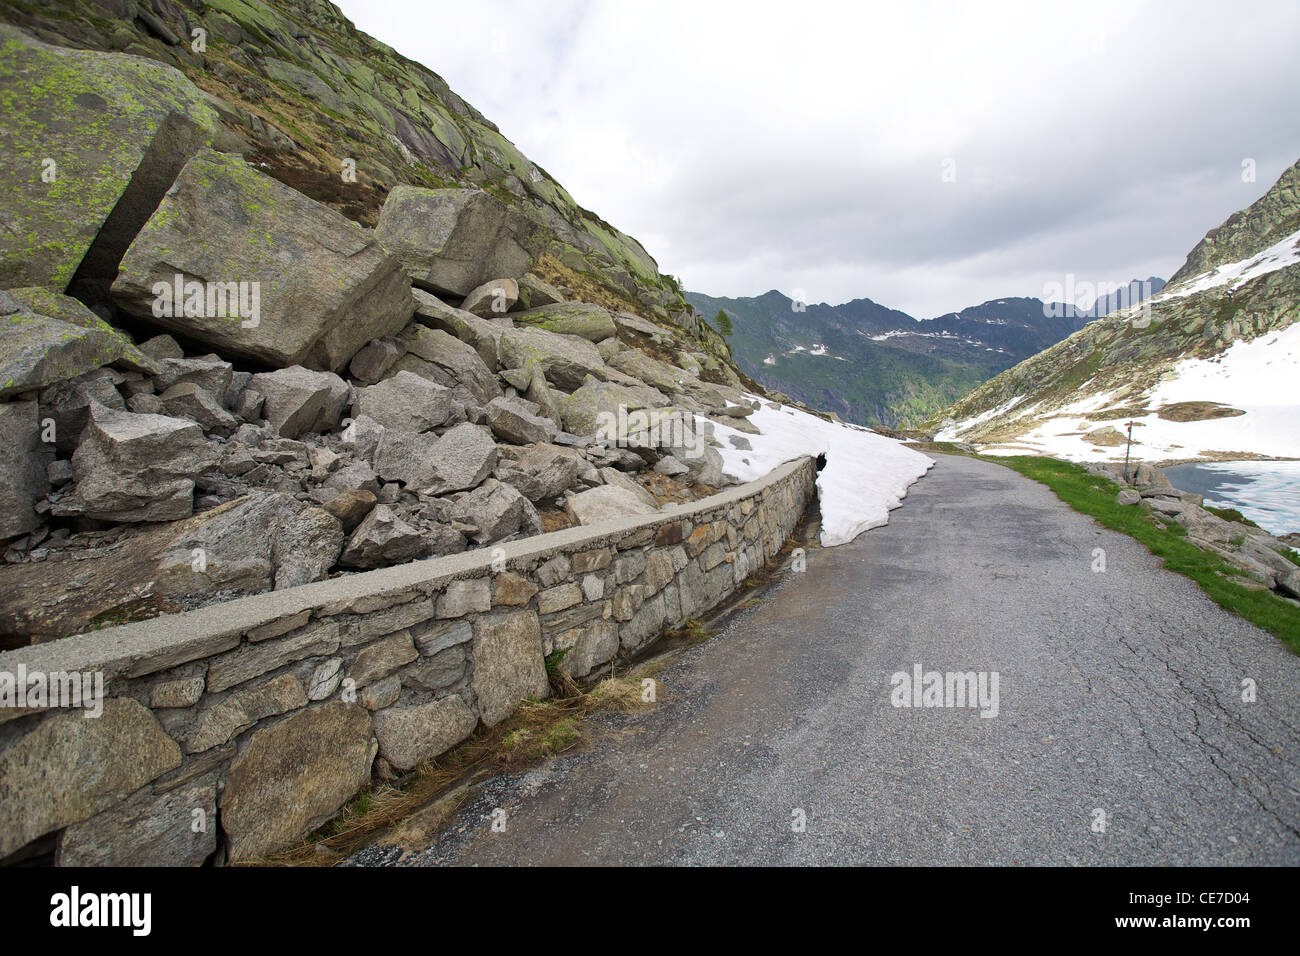 Dangerous road in the mountains of Switzerland Stock Photo